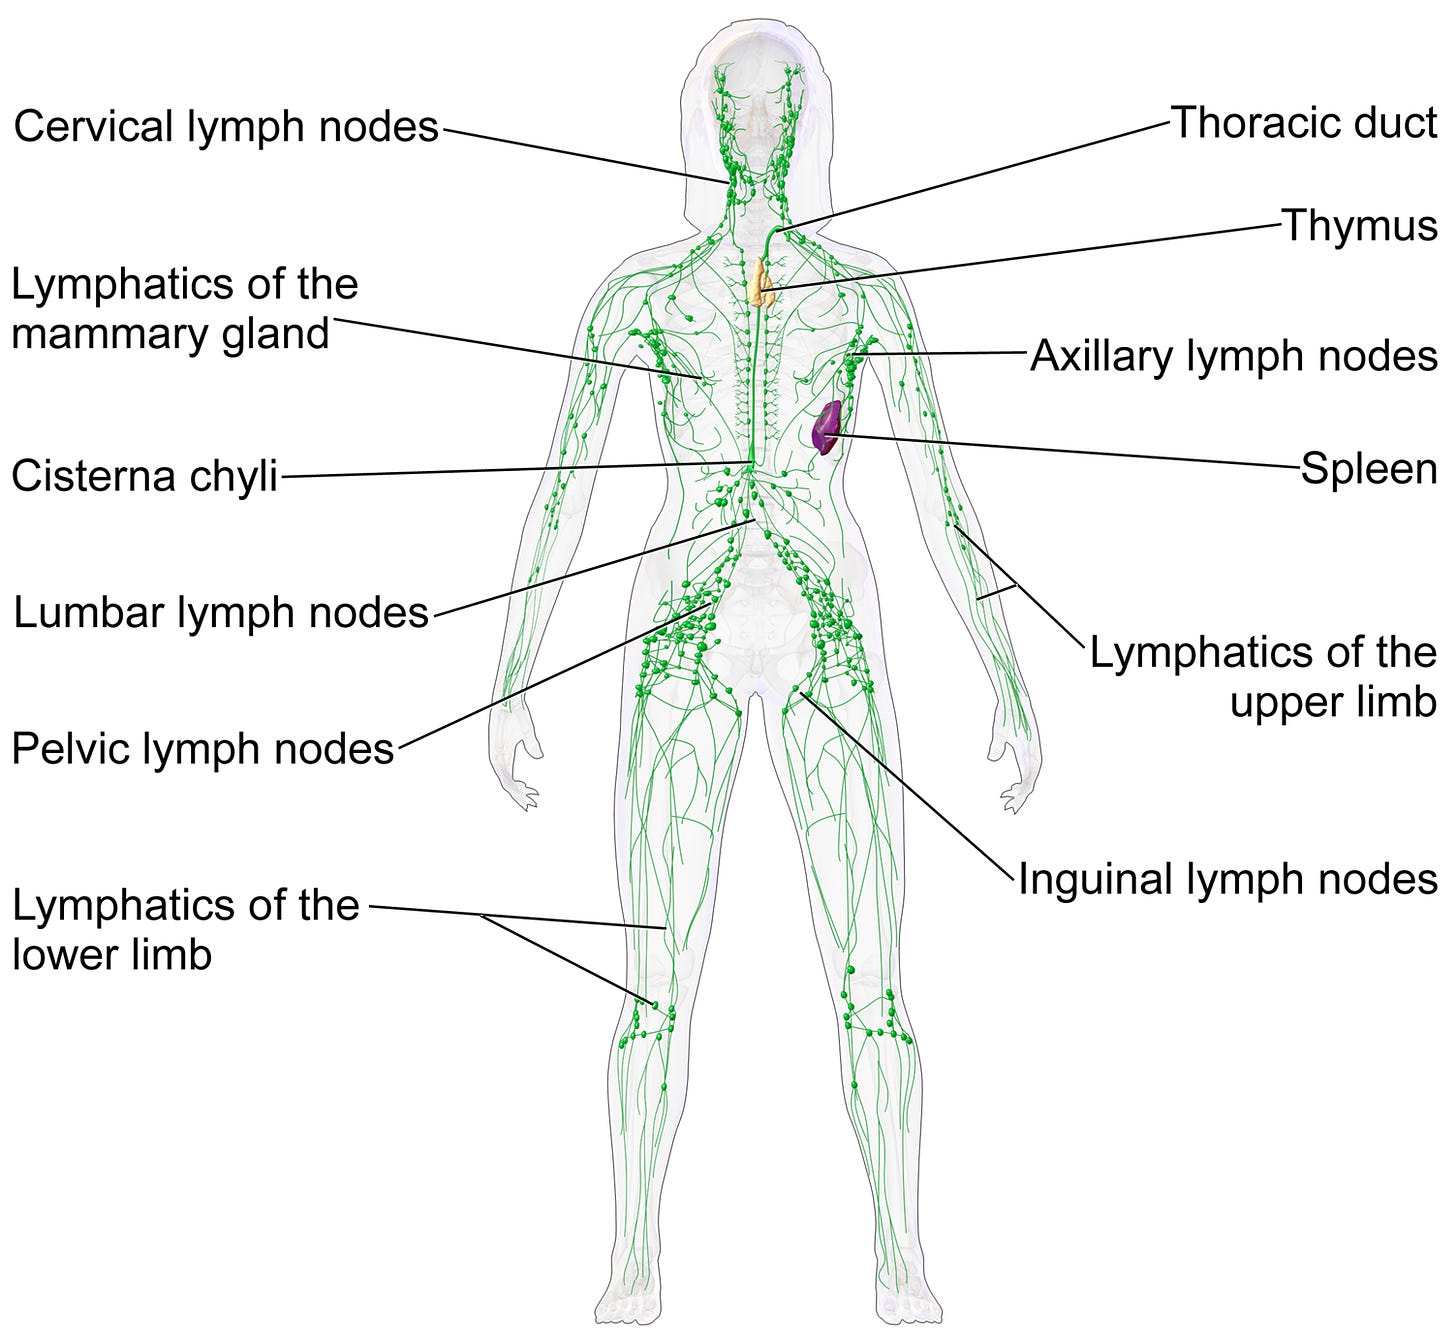 Lymphatic system - Wikipedia